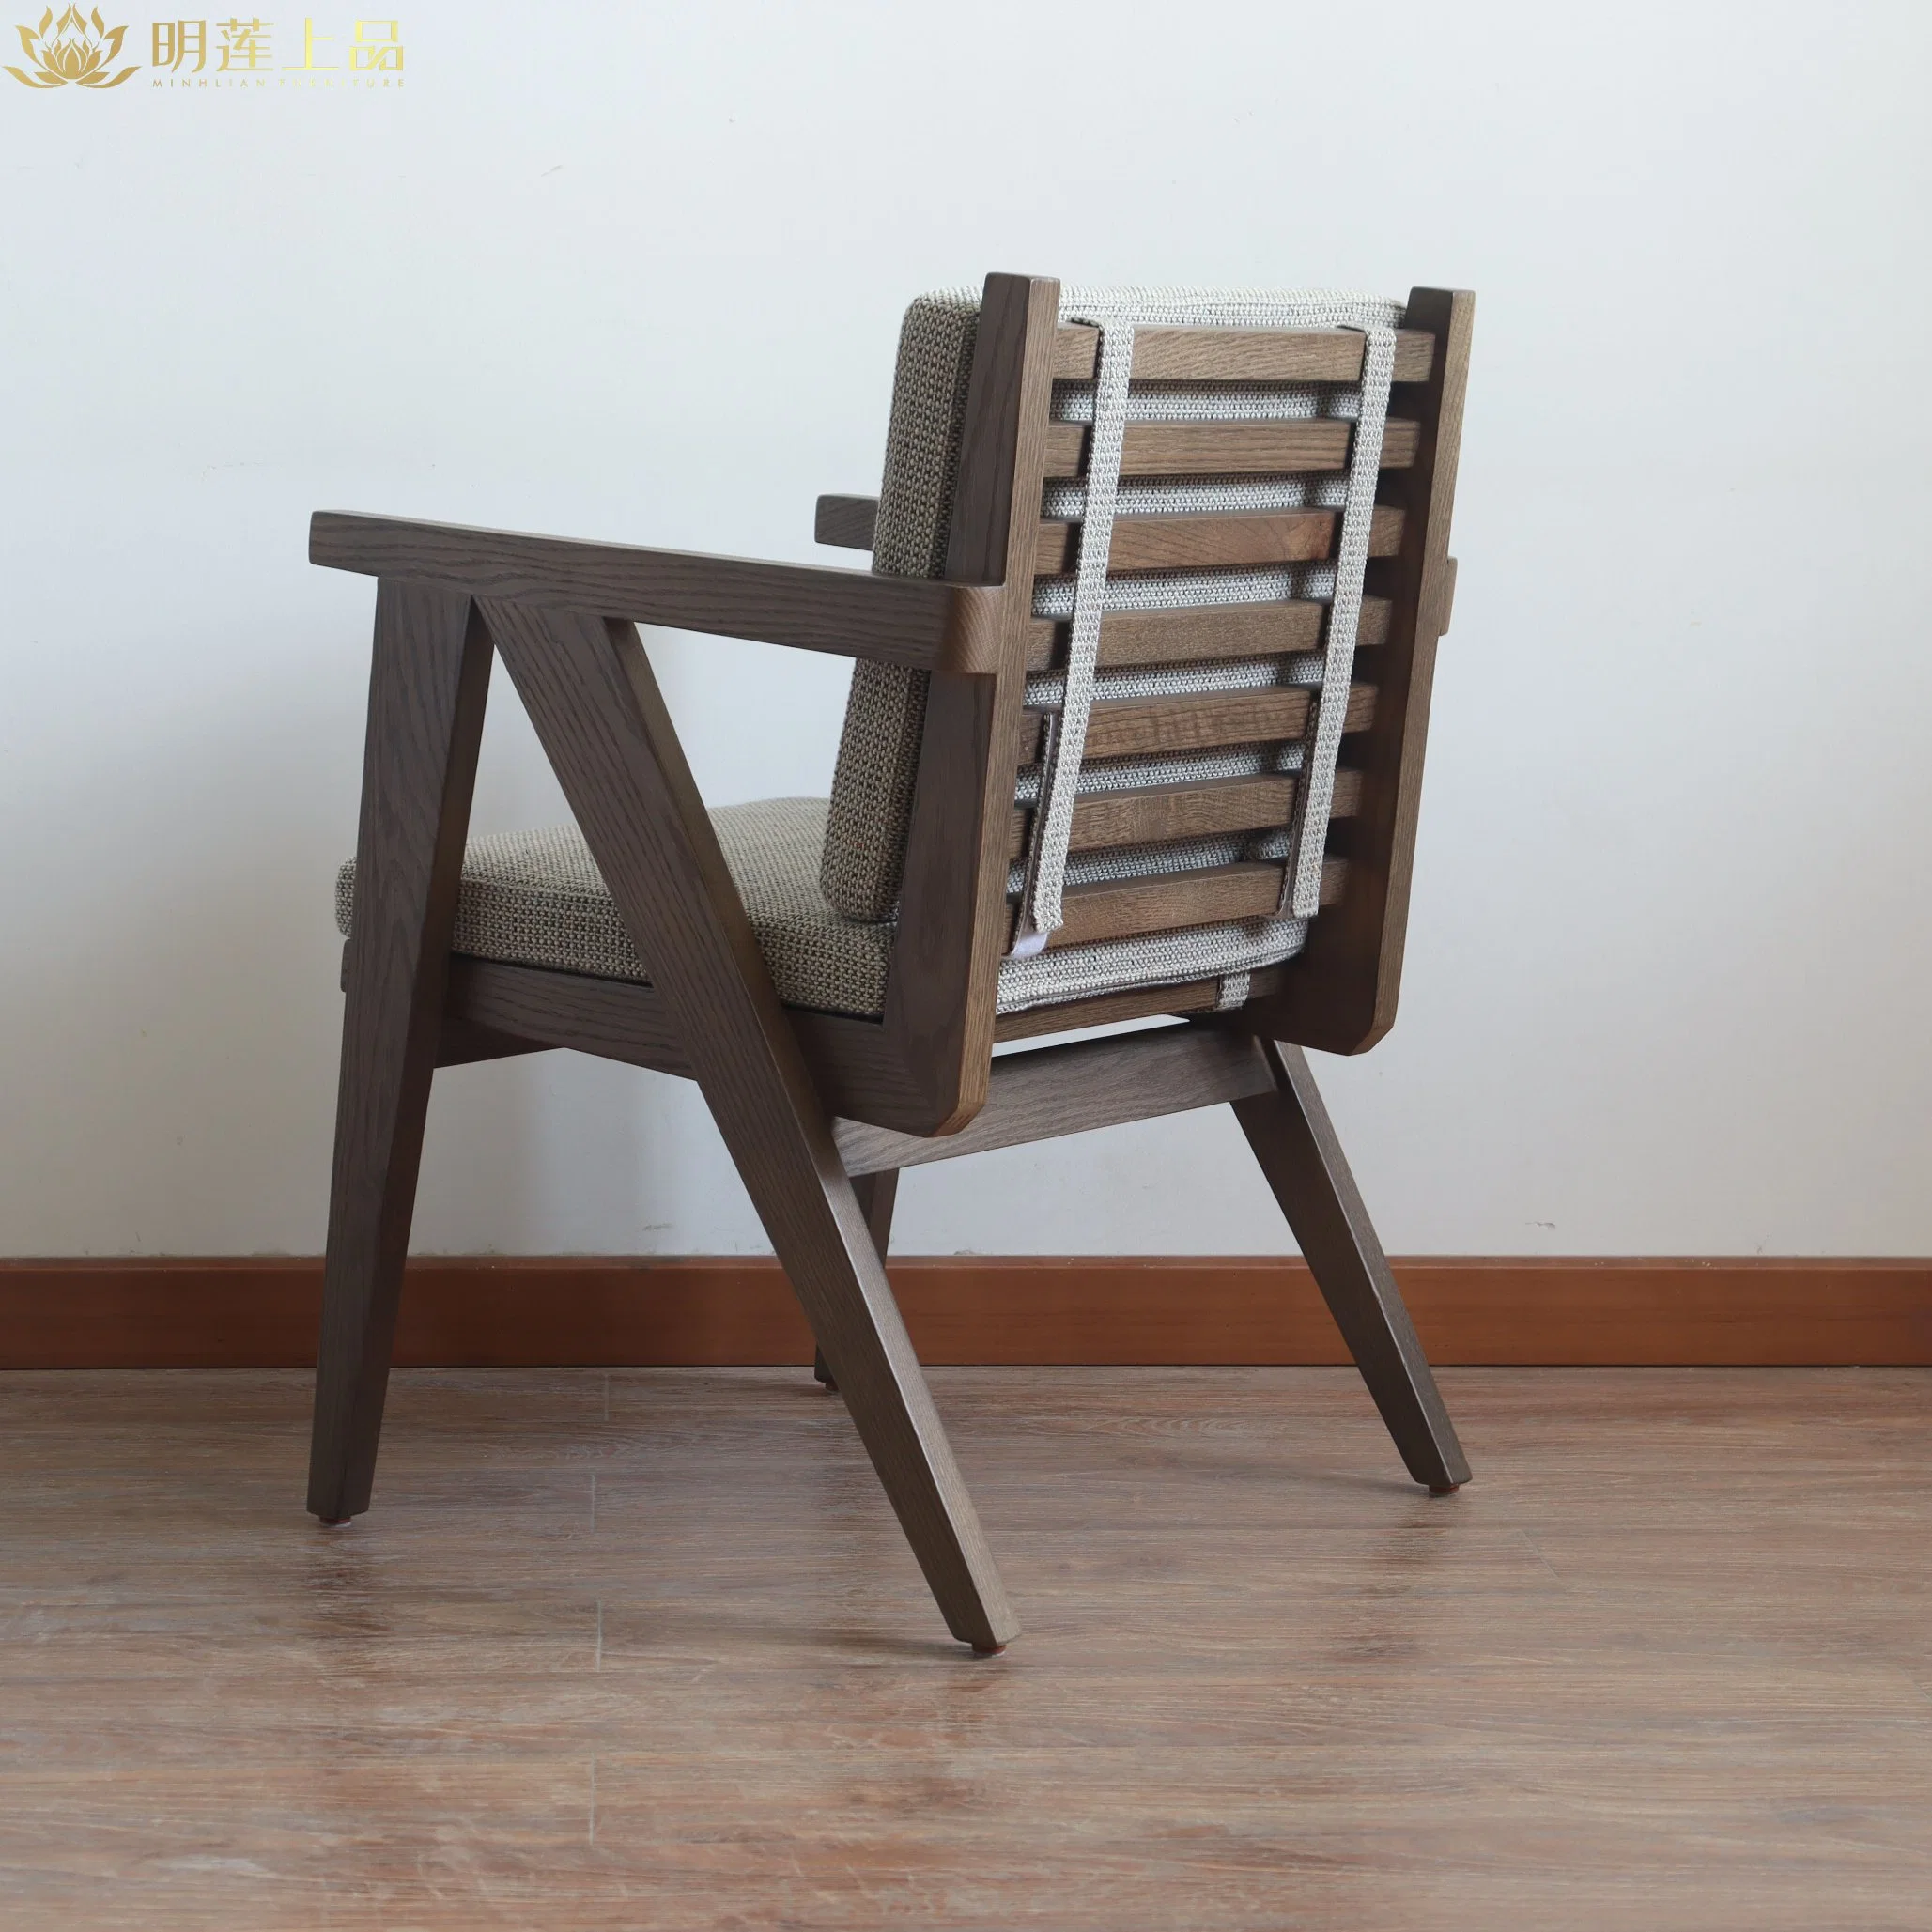 Fabric Upholstered Solid Wood Chair Hotel Furniture Living Room Furniture Restaurant Furniture Leisure Chair Dining Chair Armchair Wooden Chairs